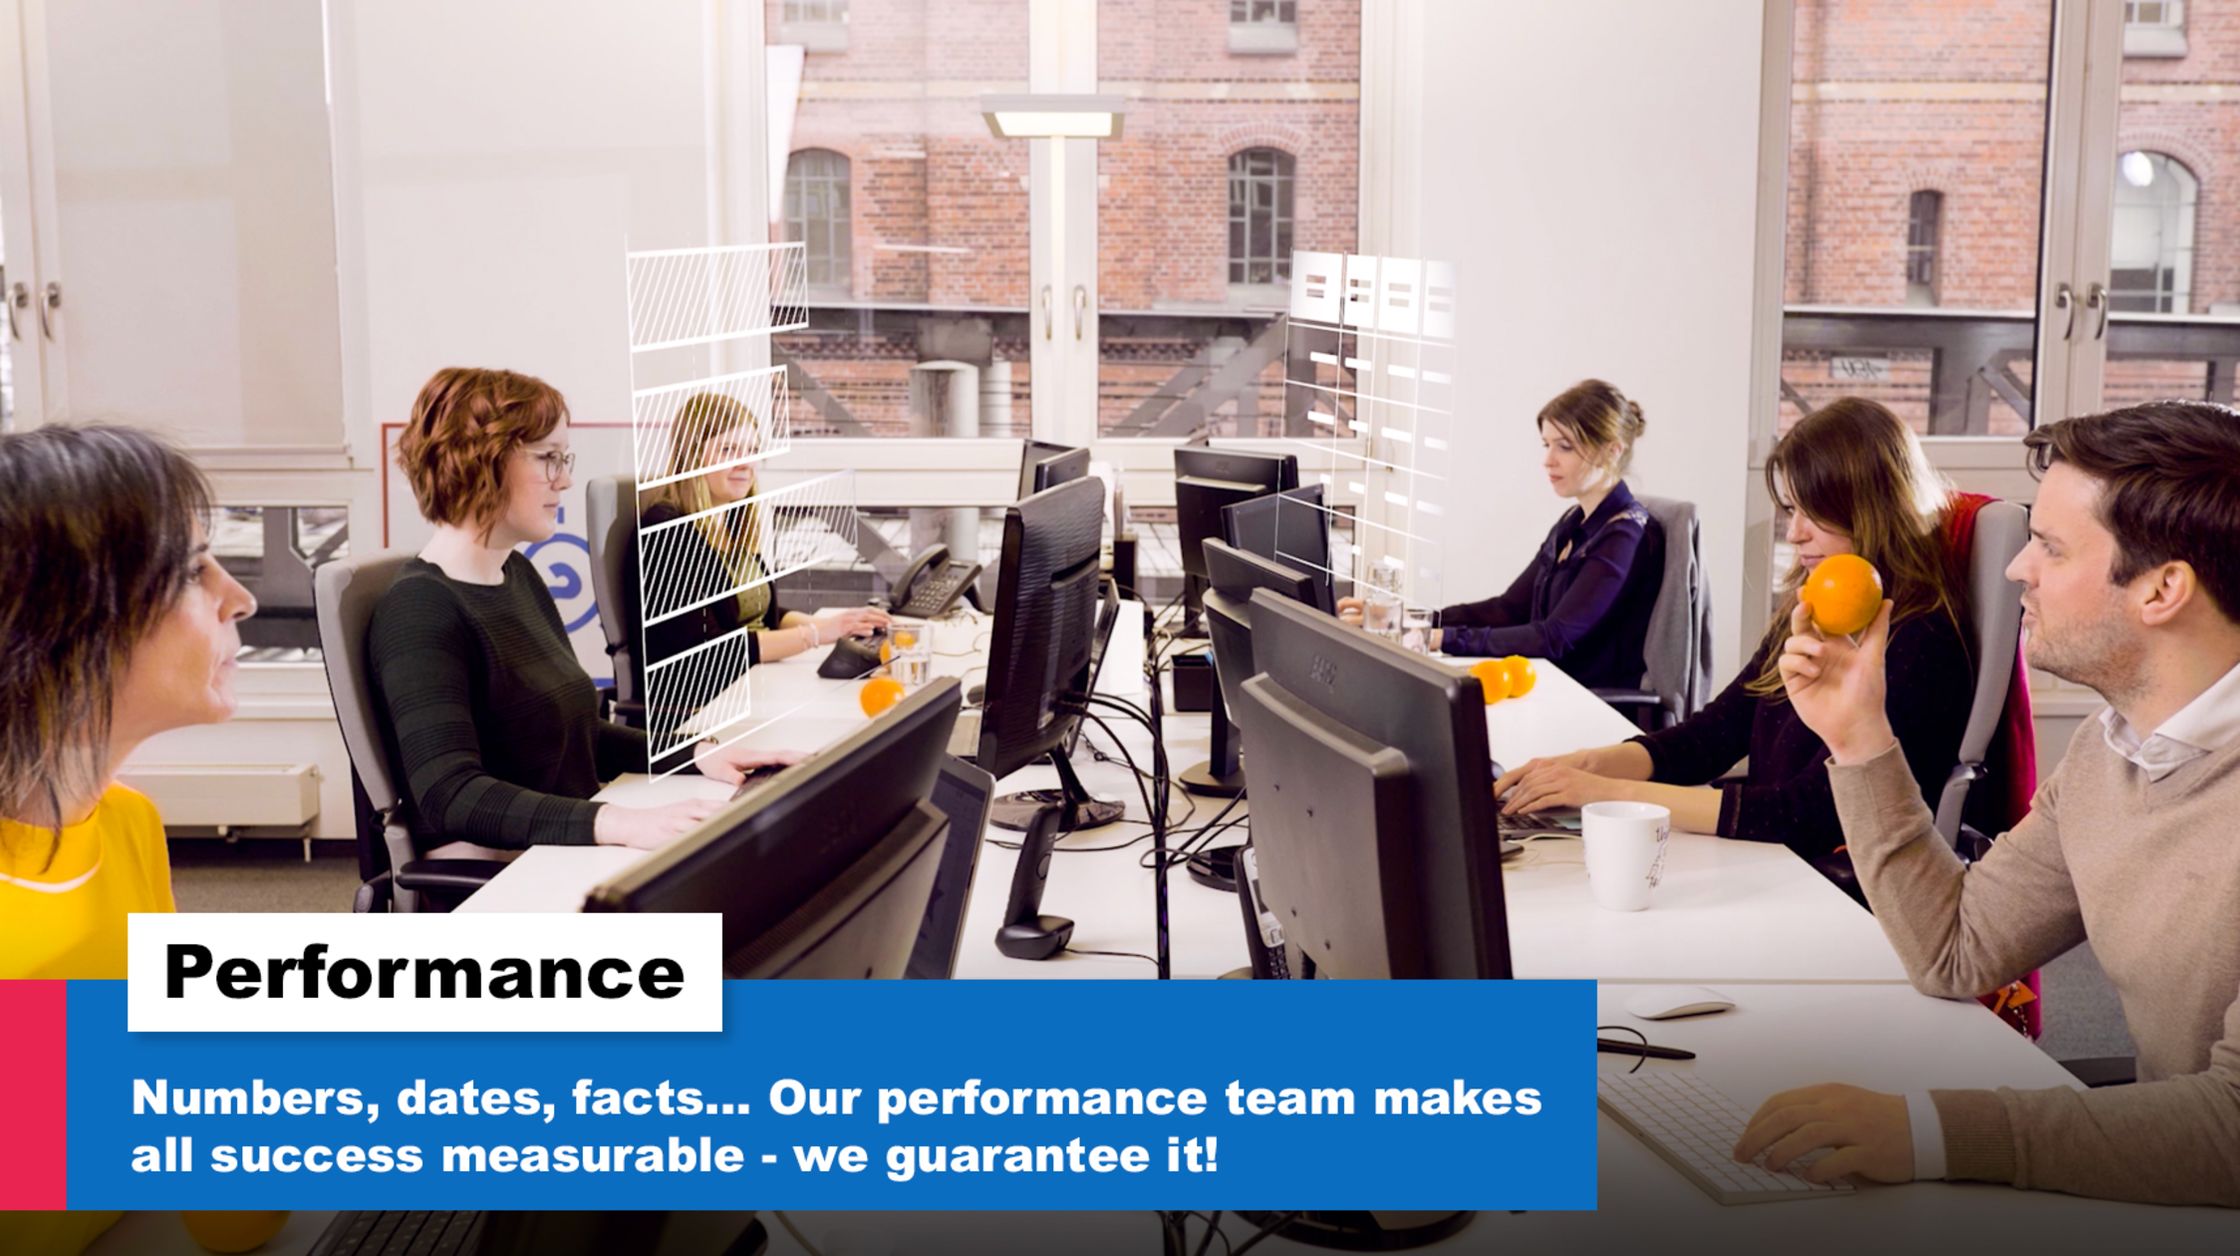 Performance. Our team makes success measurable.